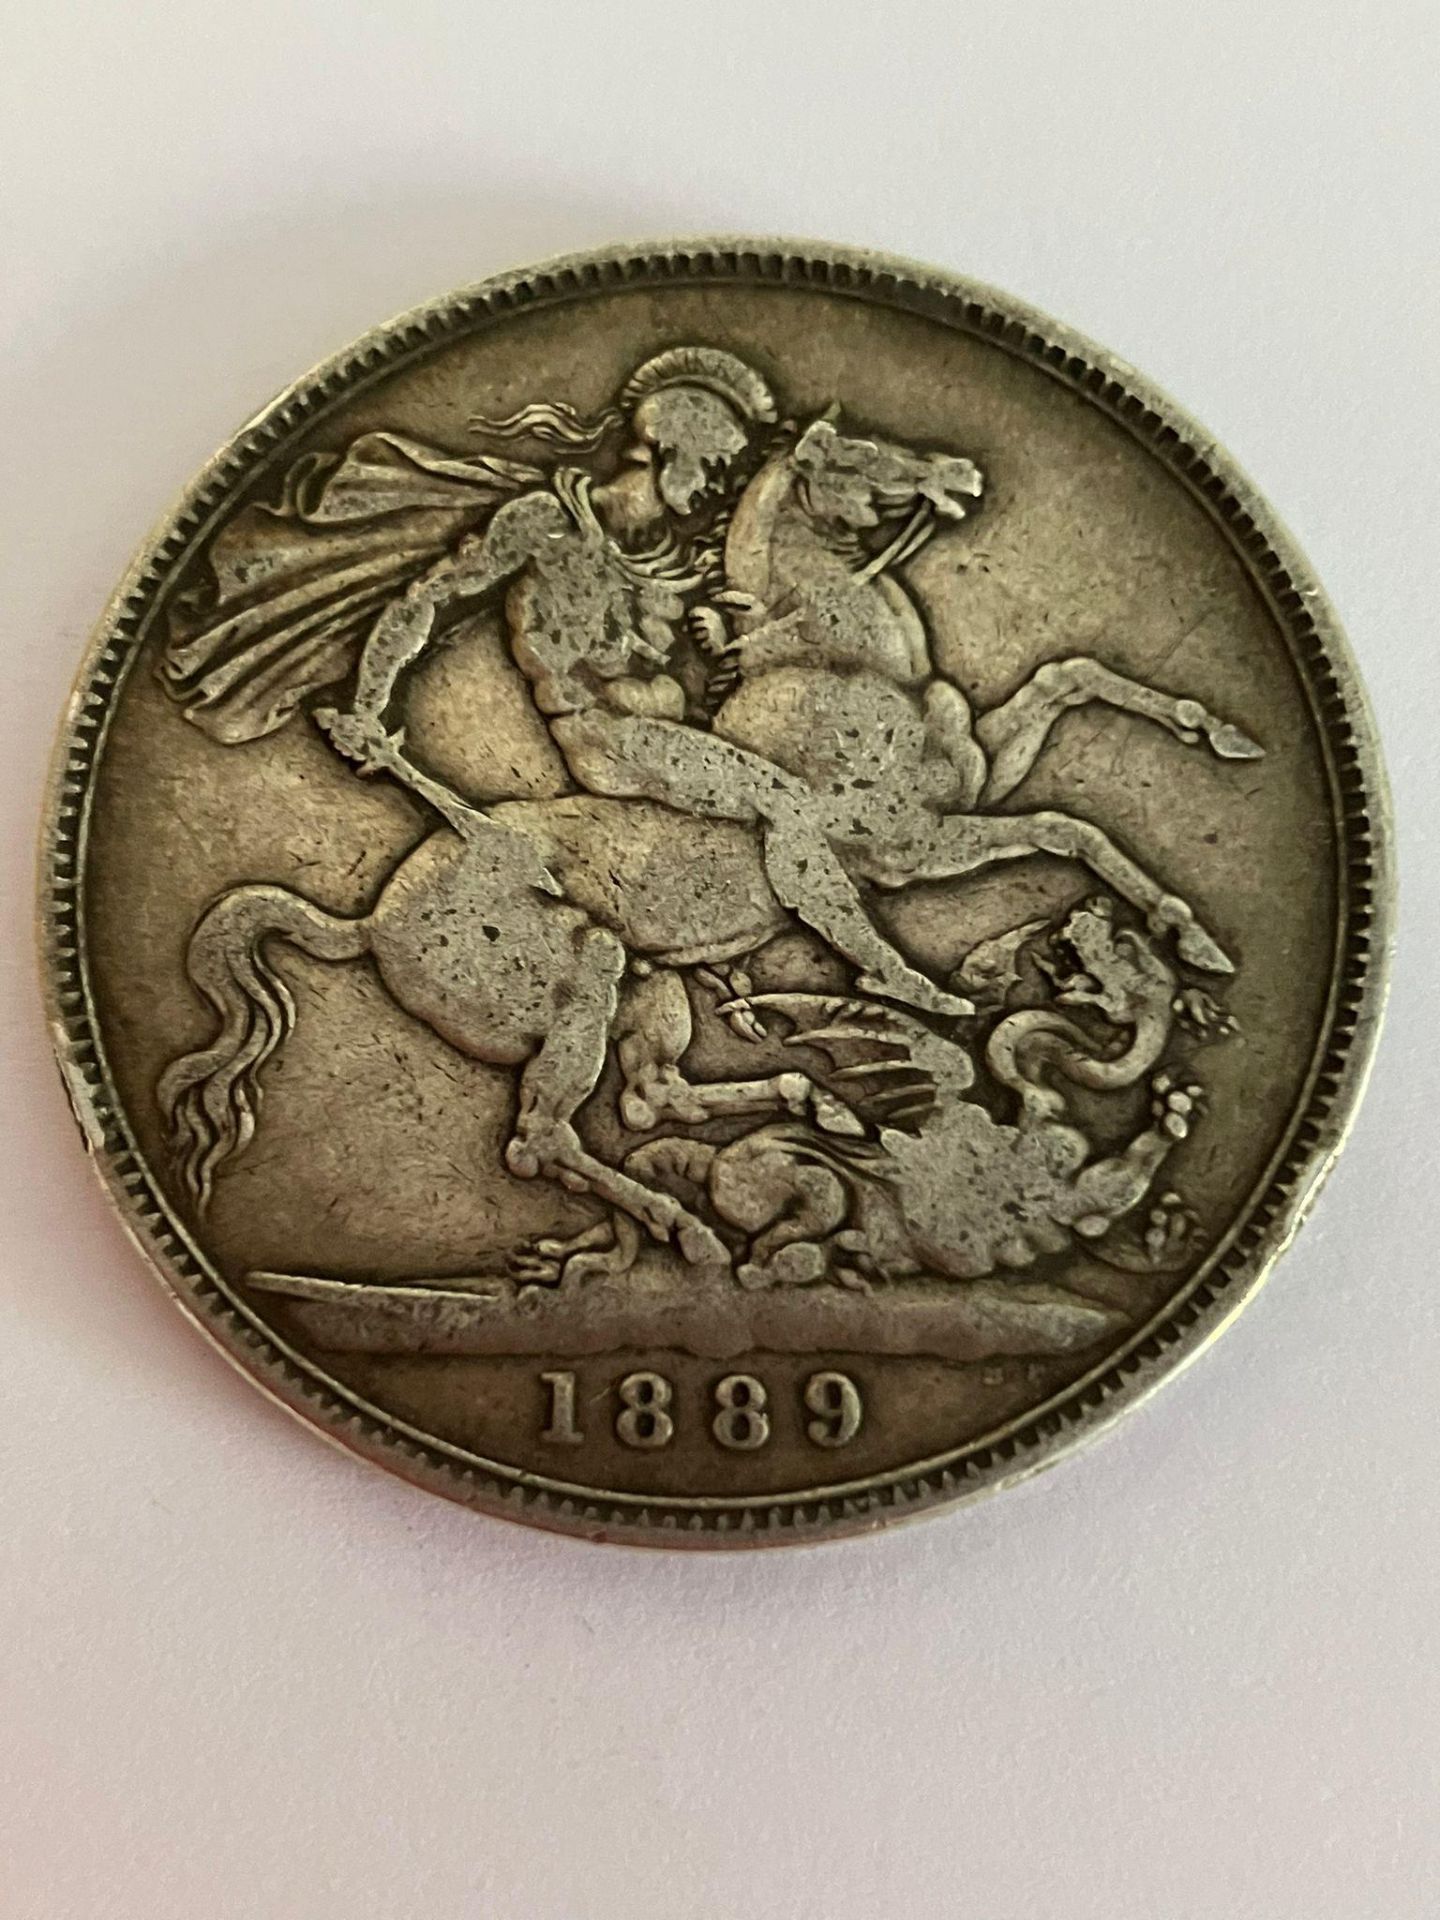 Victorian SILVER CROWN 1889 in Extra fine condition. Having clear and raised detail to both sides.